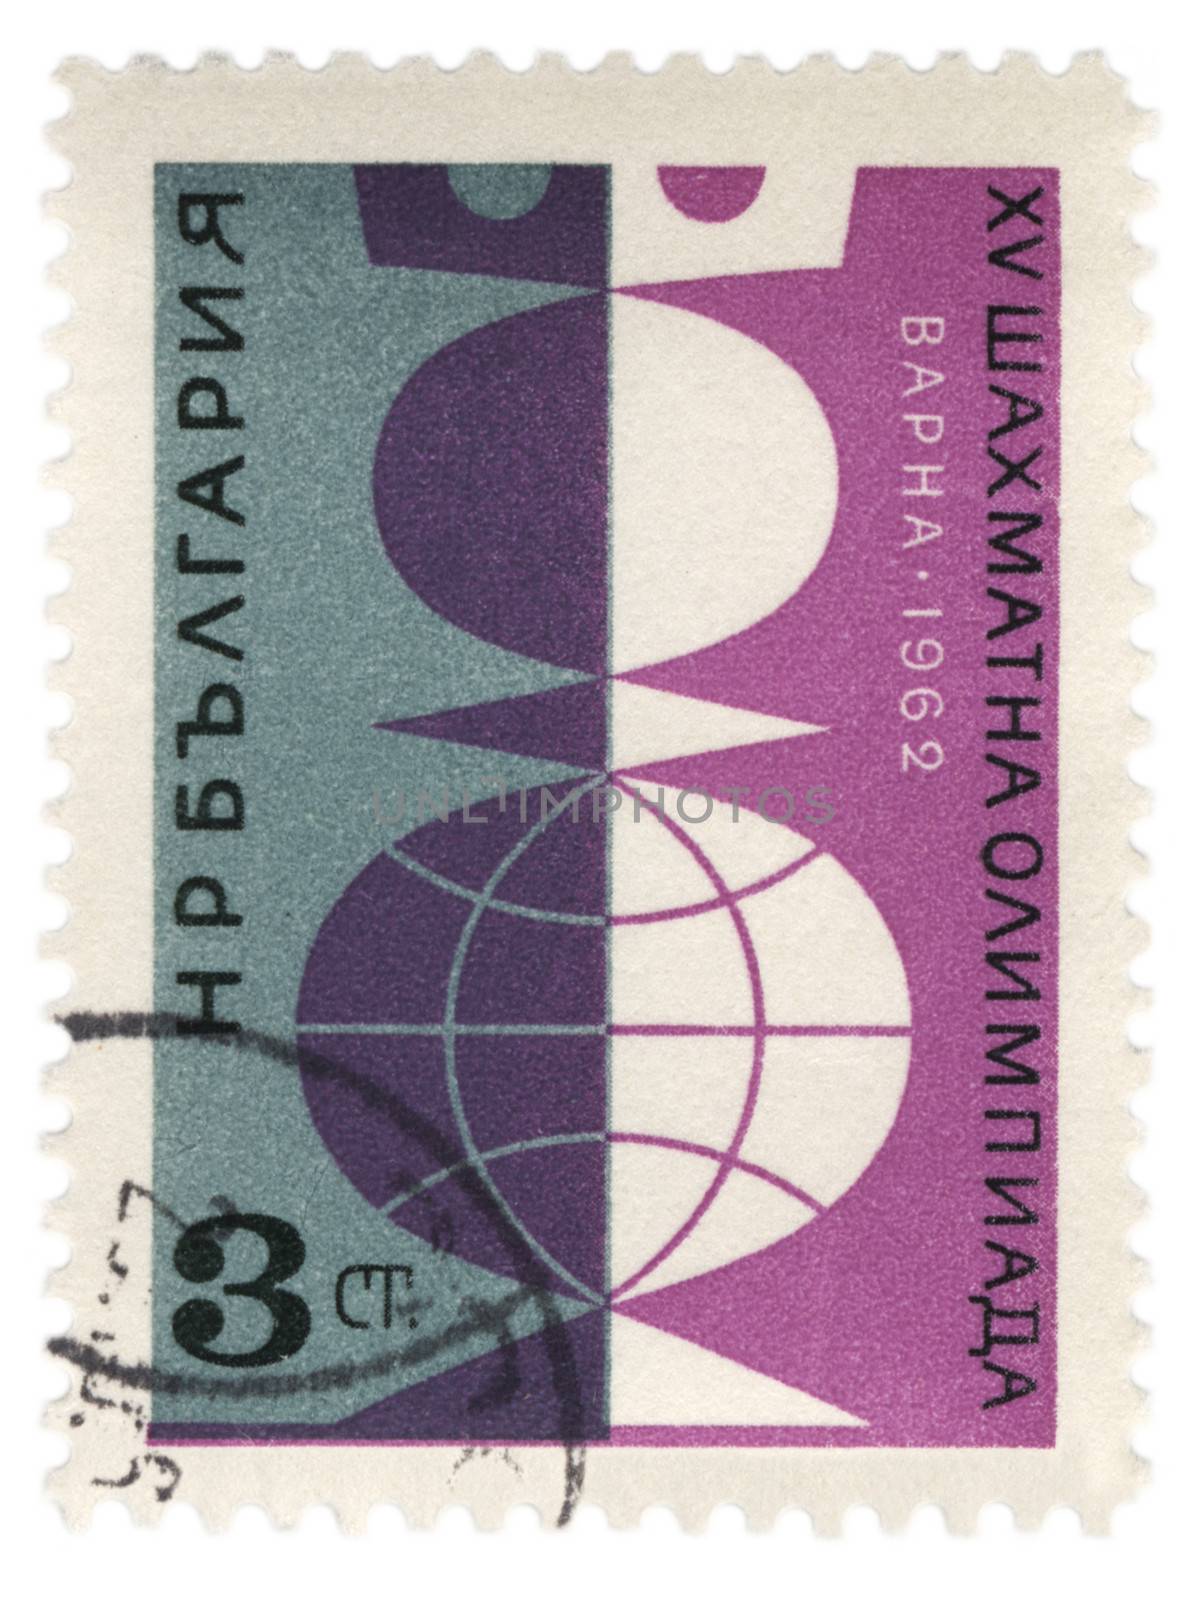 Chess Olympiad on post stamp by wander